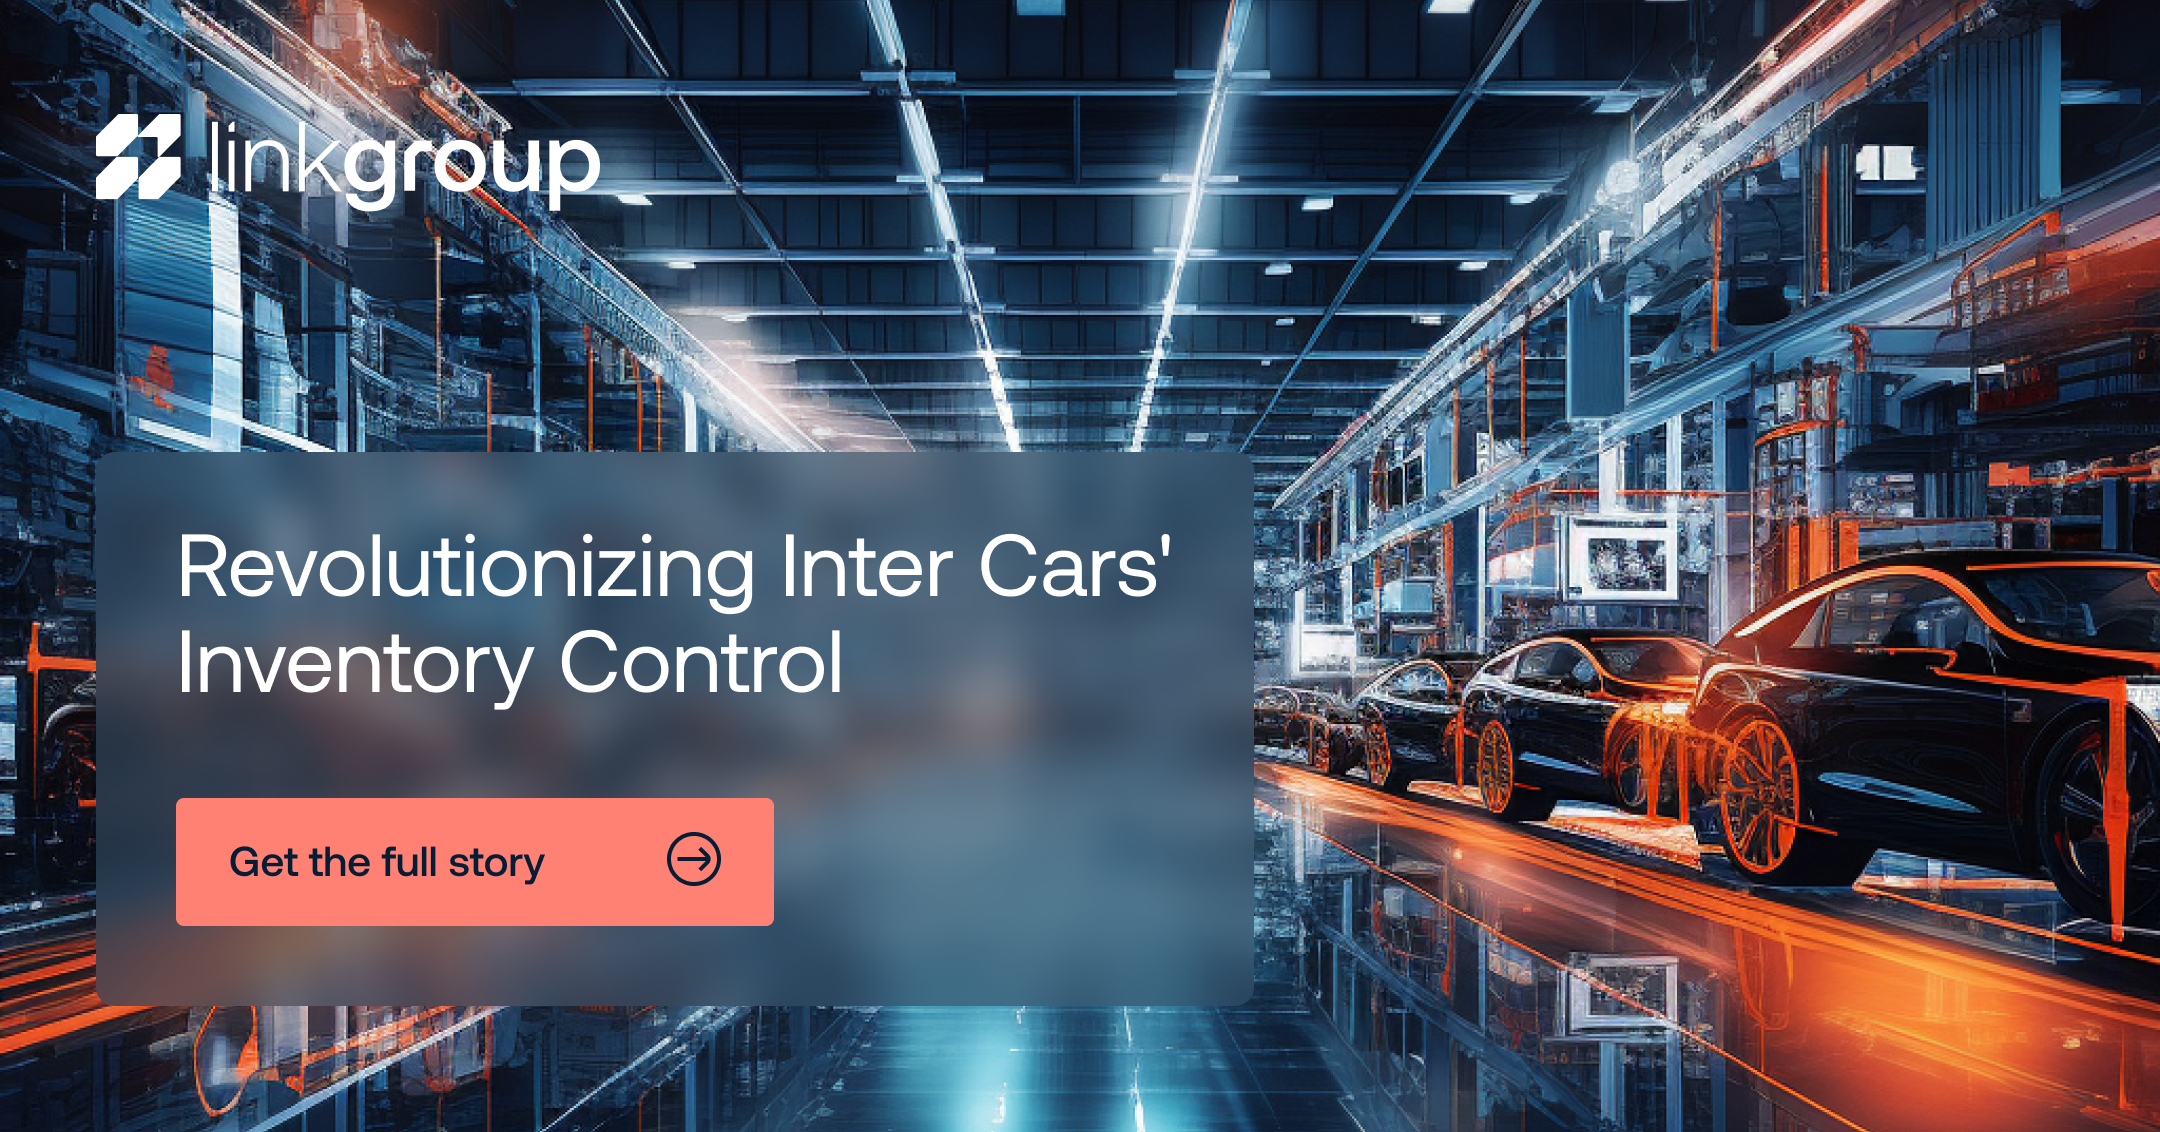 Empowering Inter Cars' Inventory with Cloud Services